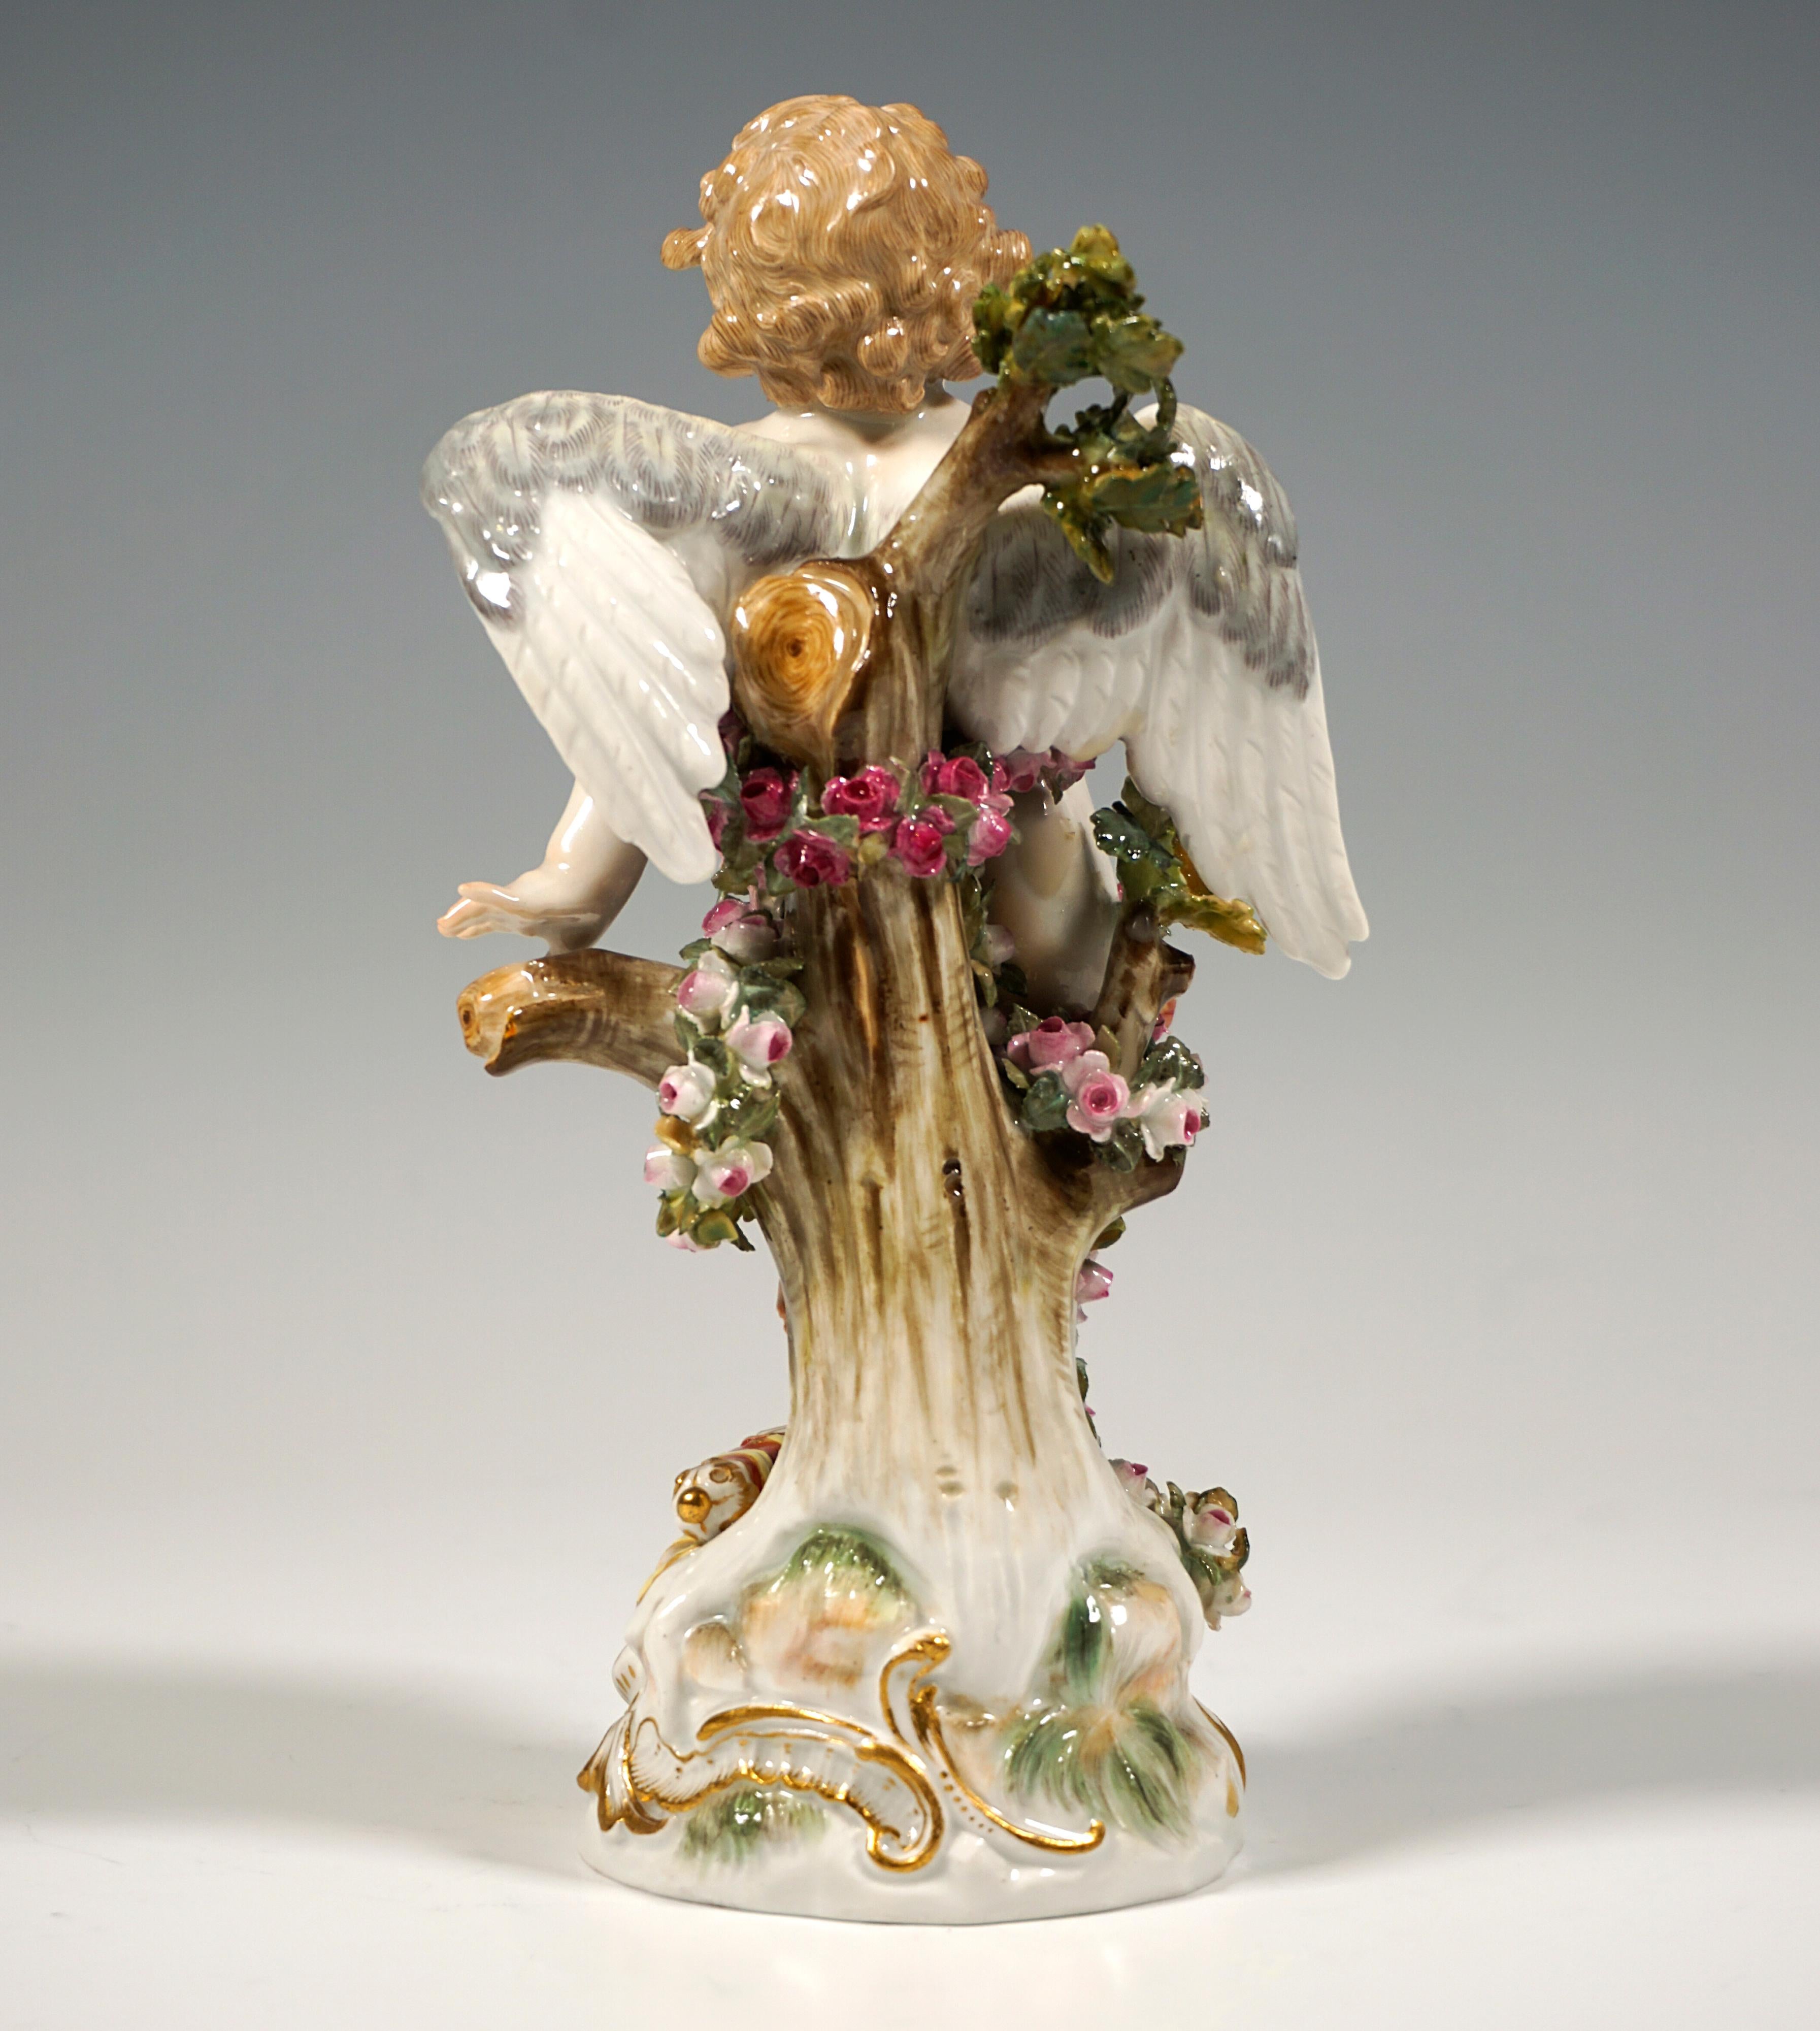 Hand-Crafted Meissen Art Nouveau Figure 'Tied Up Cupid' by Paul Helmig, Germany Circa 1900